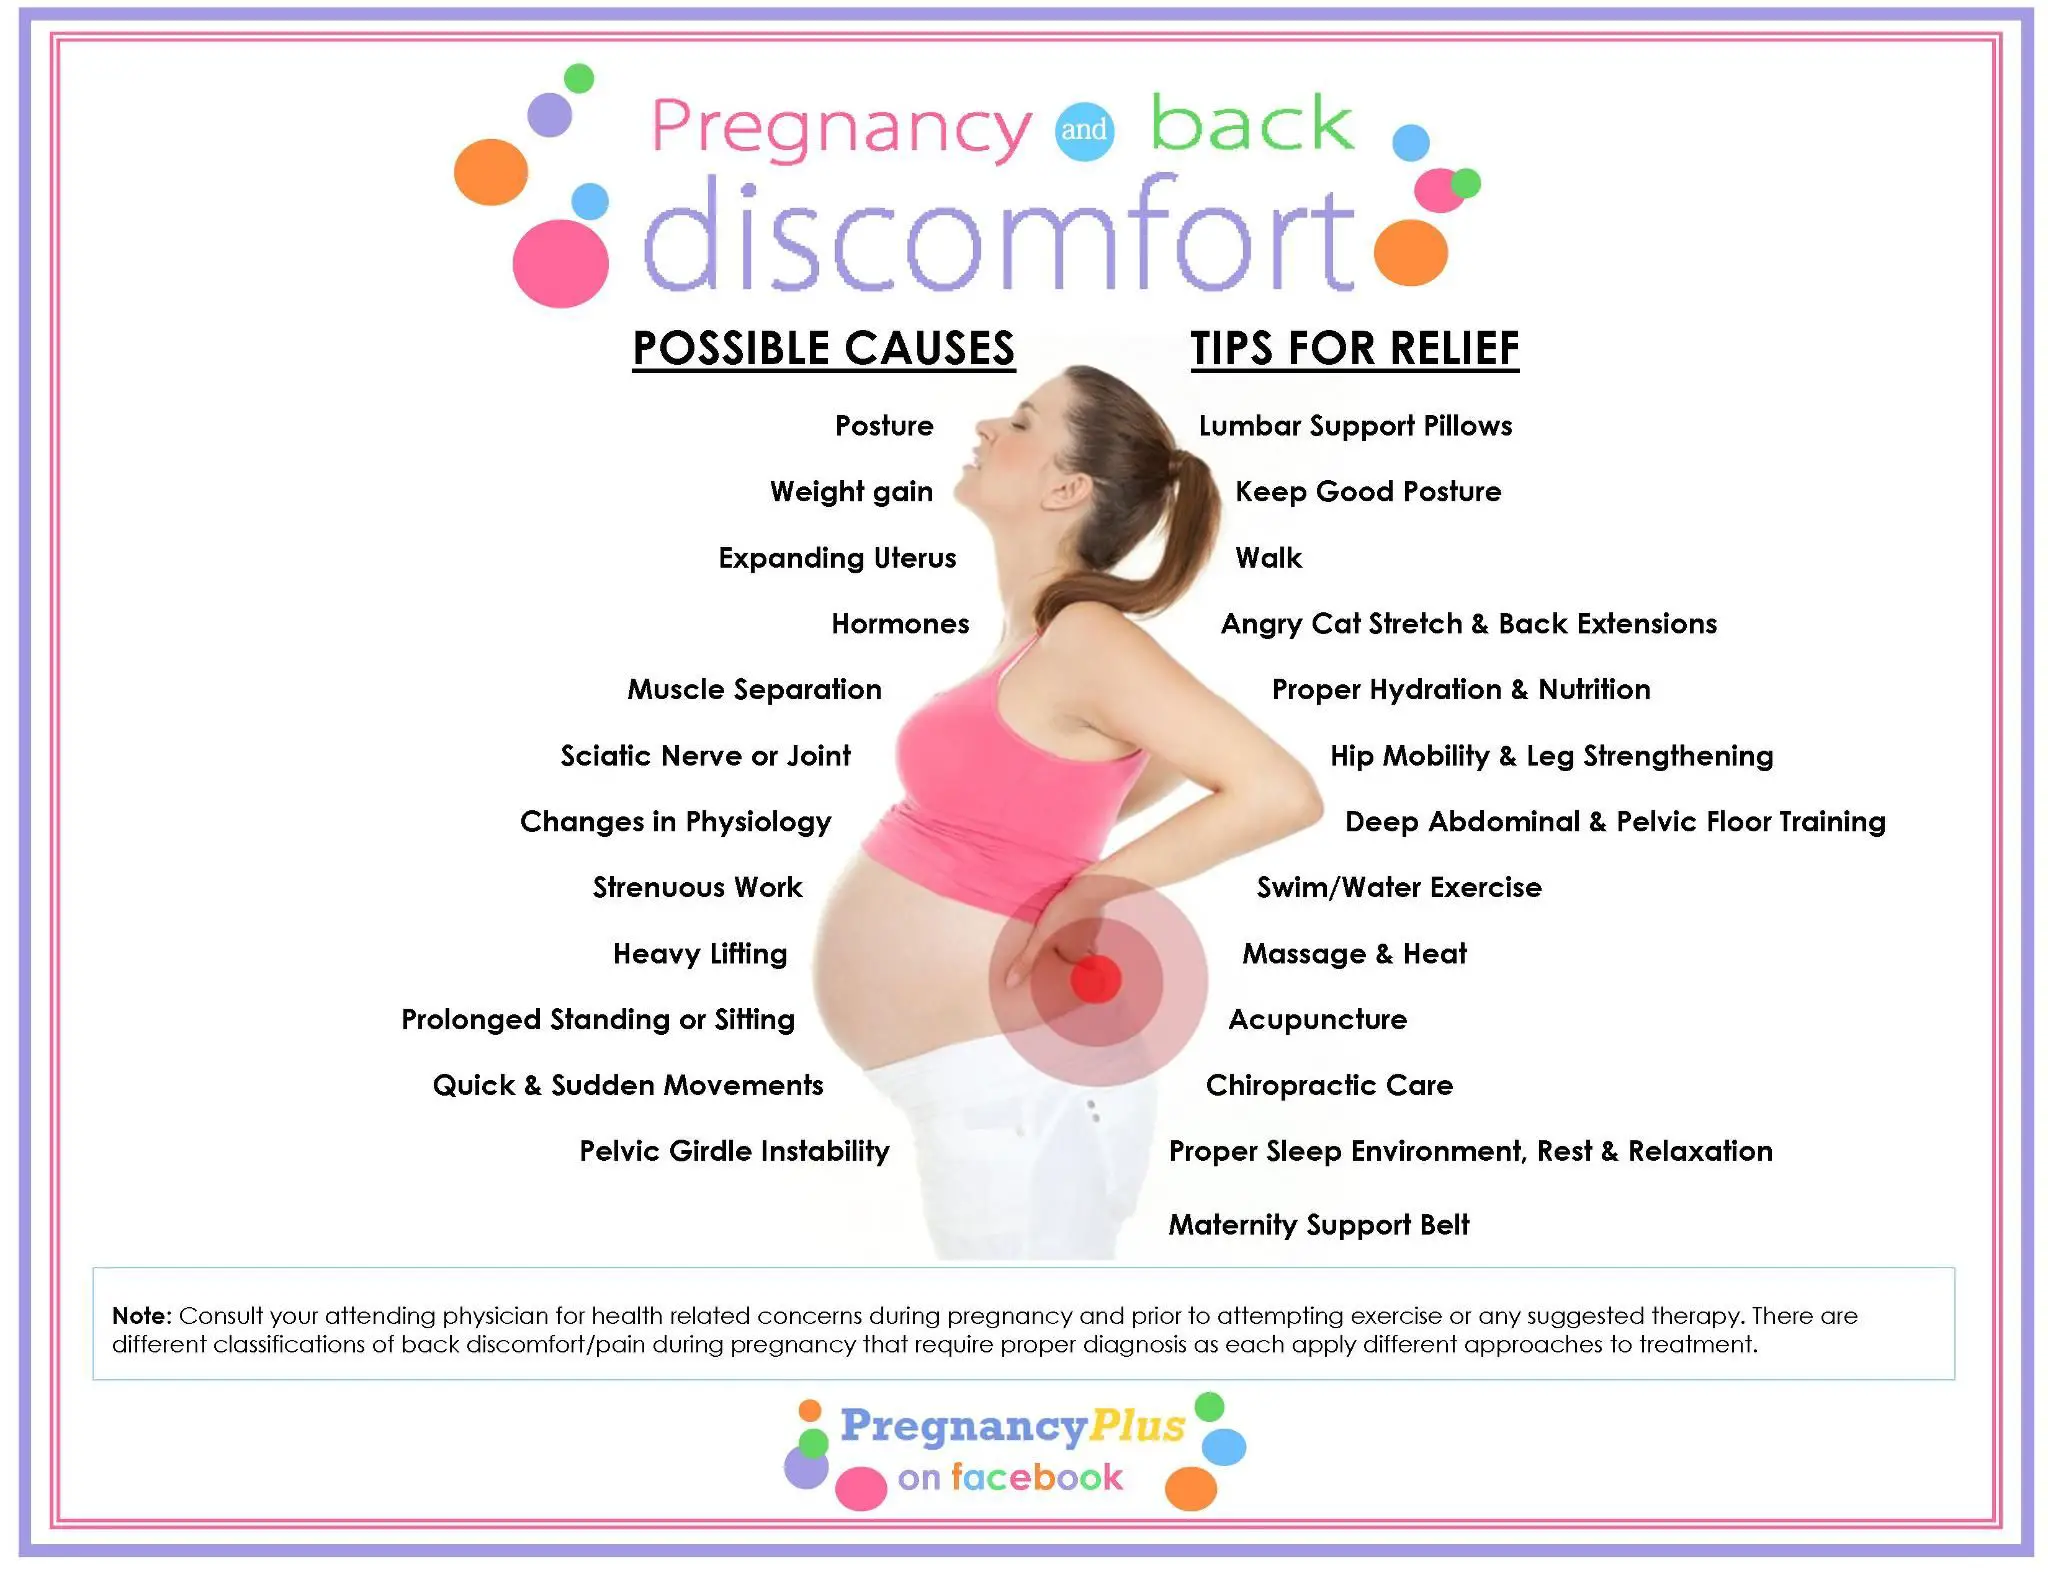 Back pain relief during pregnancy